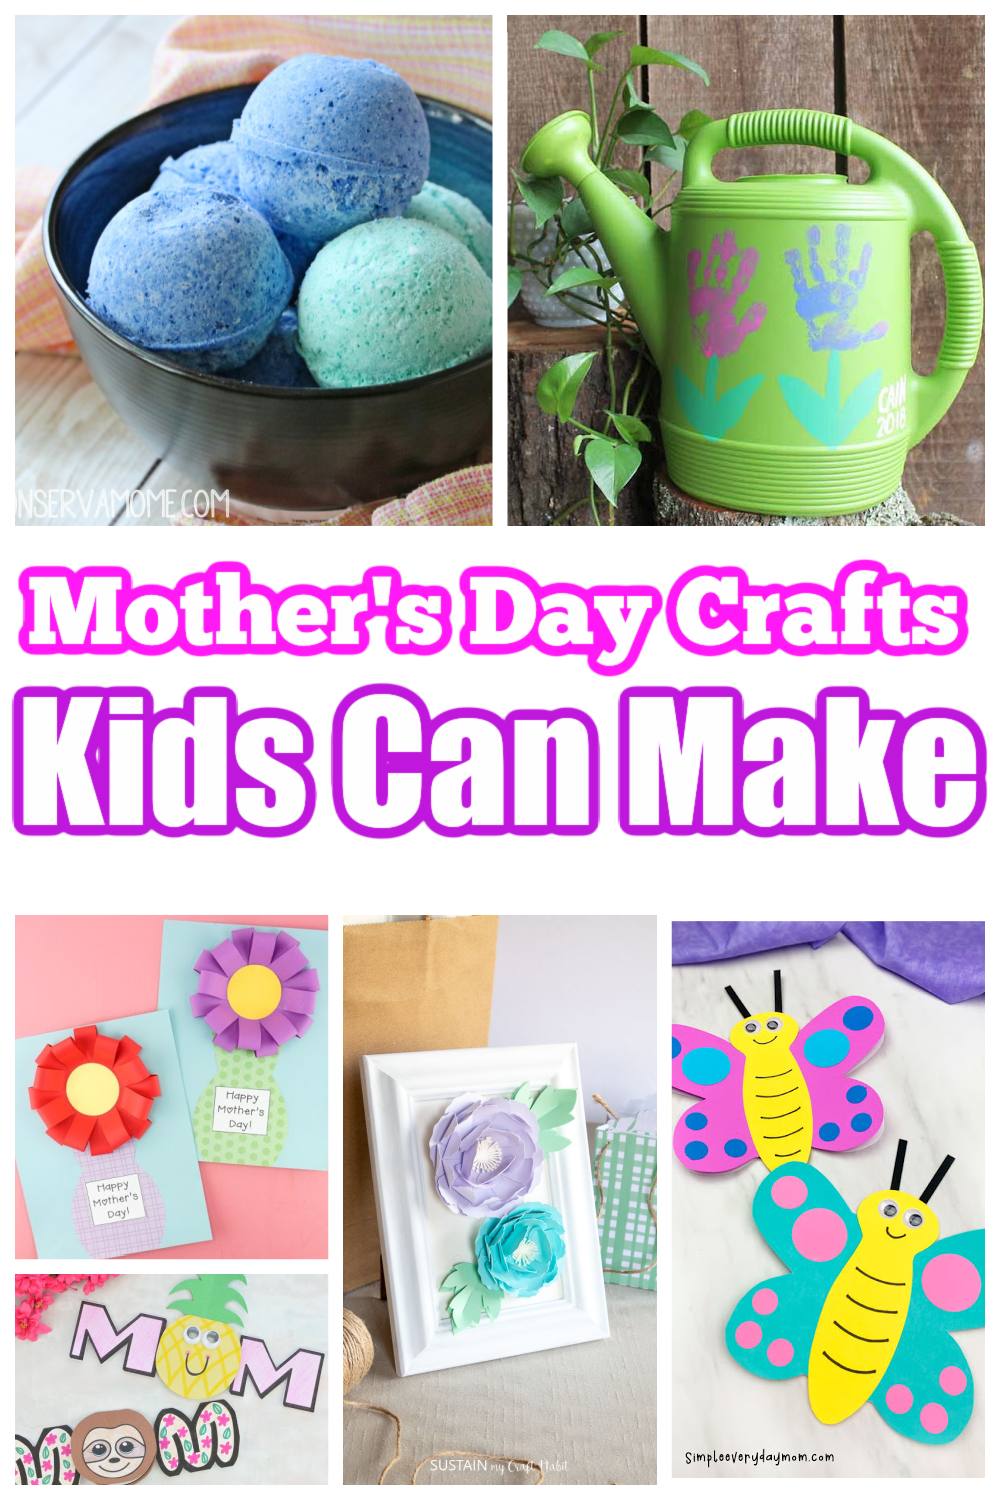 Mother's Day Crafts Kids can make